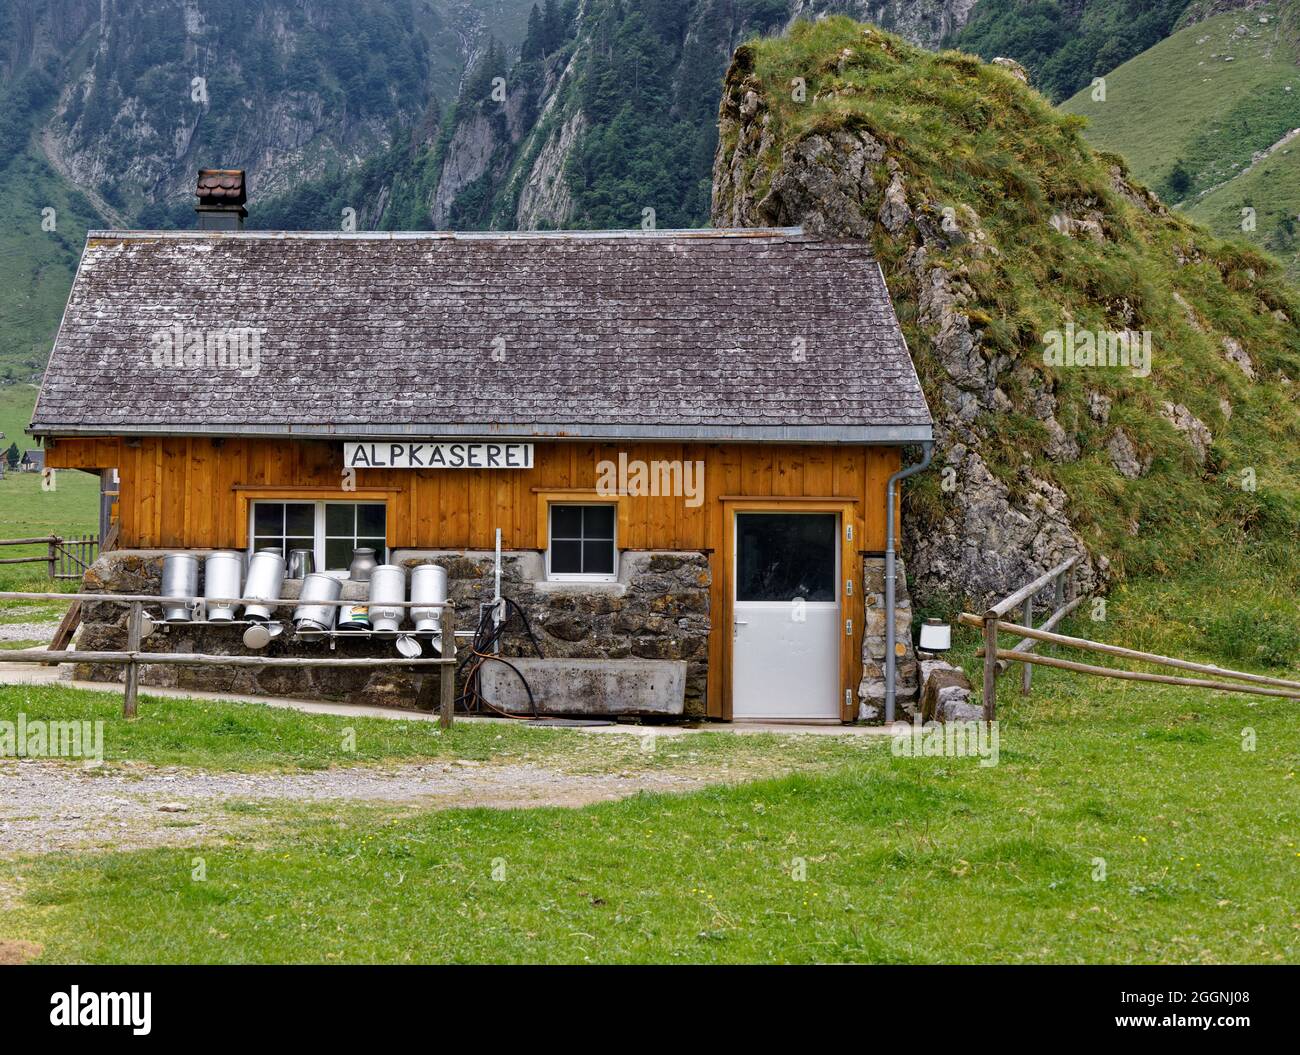 swiss alpine cheese dairy farm built in old style next to a rock wall empty milk cans in front of the house, german alp cheese dairy sign, text transl Stock Photo